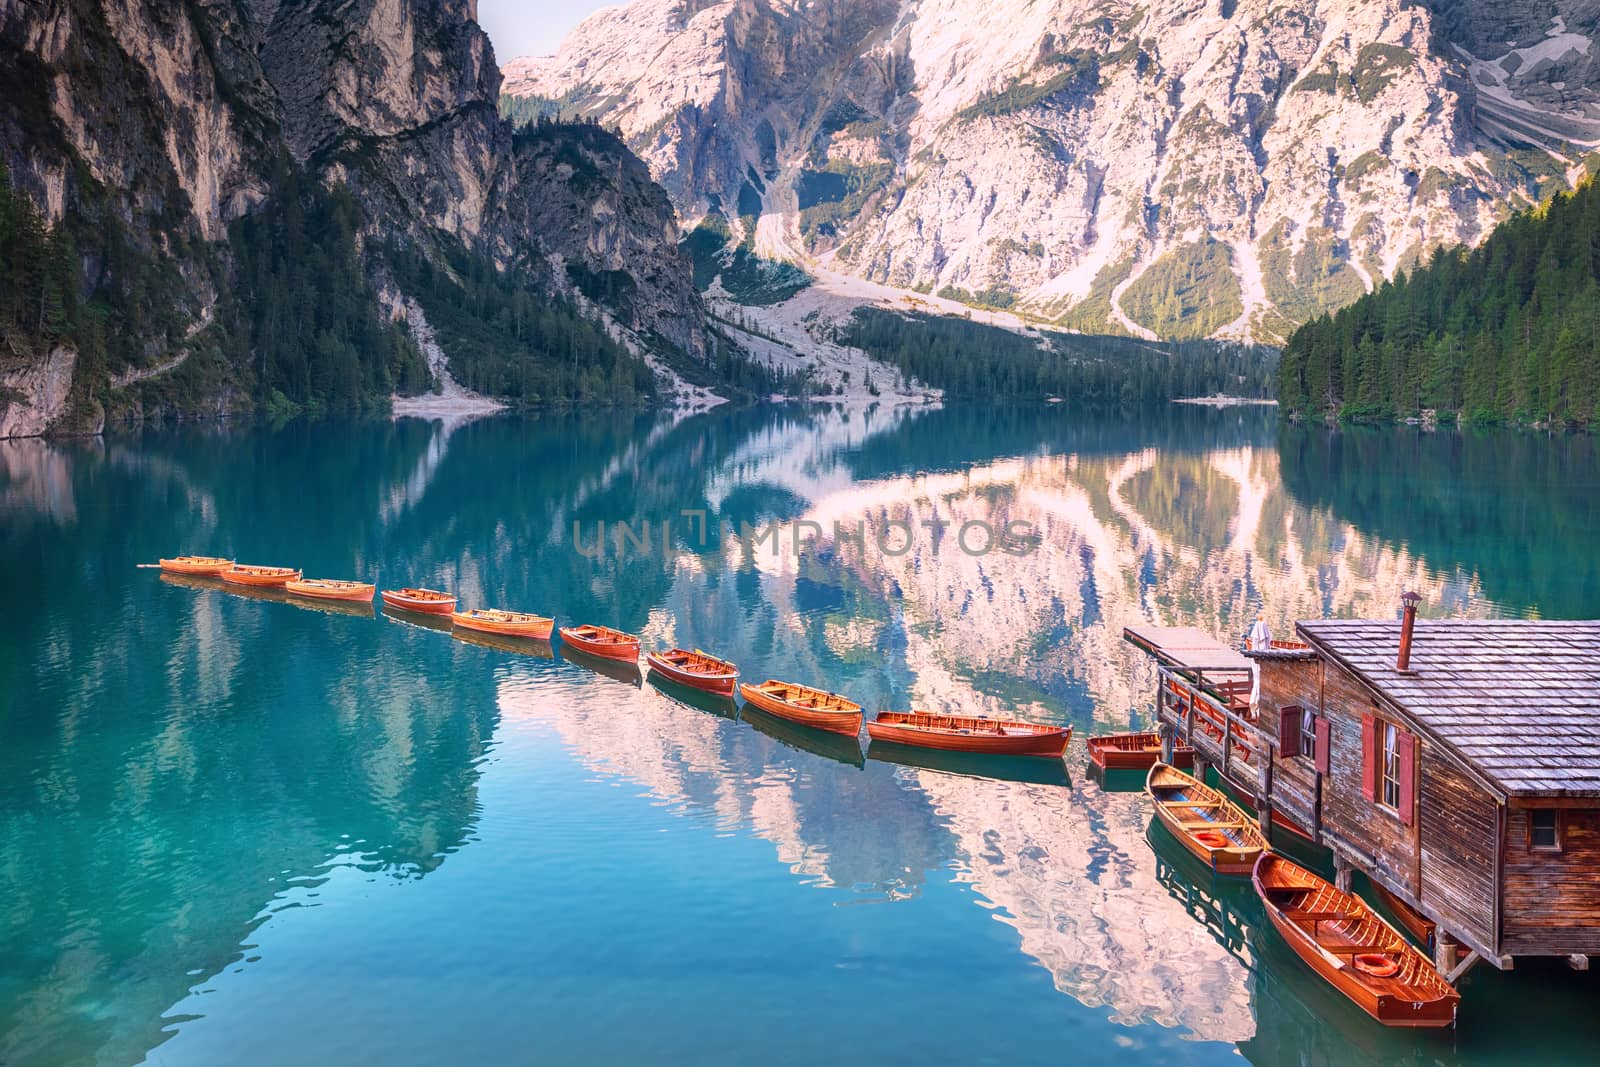 Wooden boats in a row on summer morning at Lago di Braies, Italy by zhu_zhu